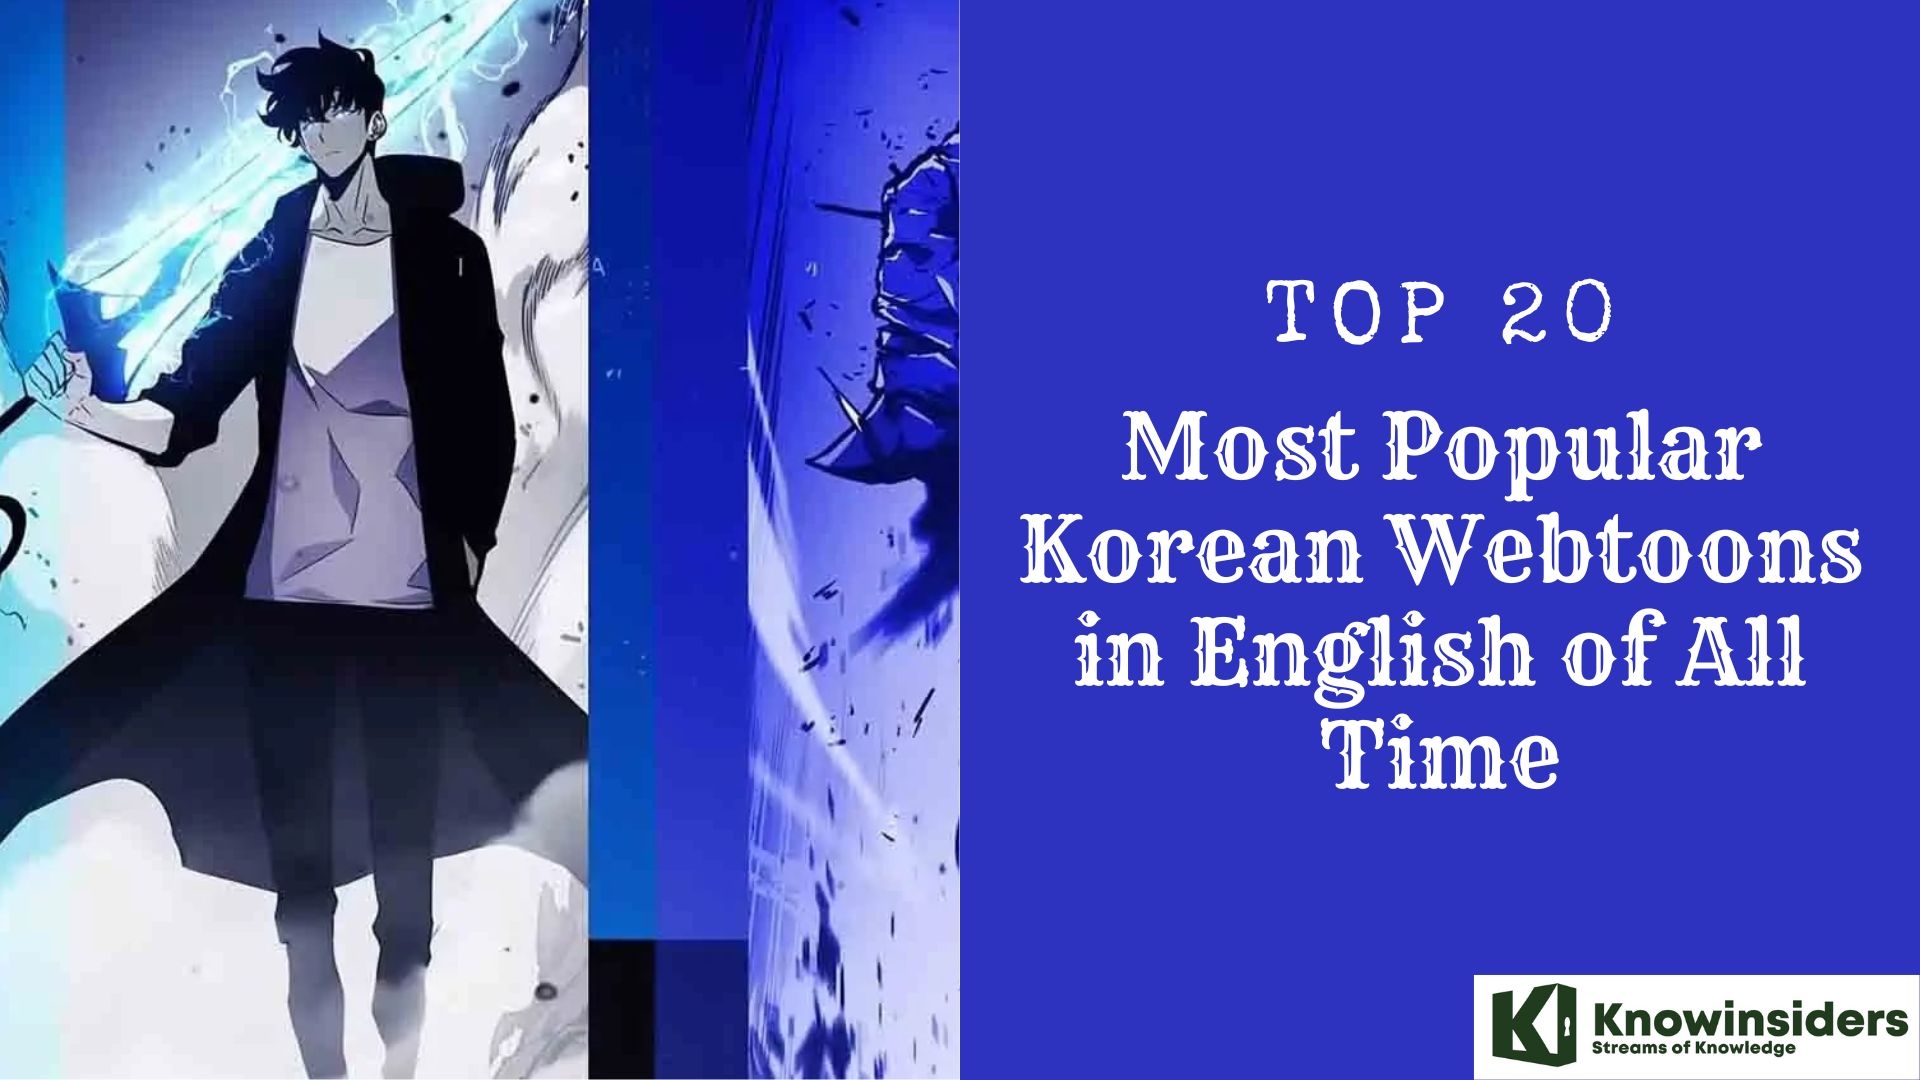 Top 20 Most Popular Korean Webtoons in English of All Time